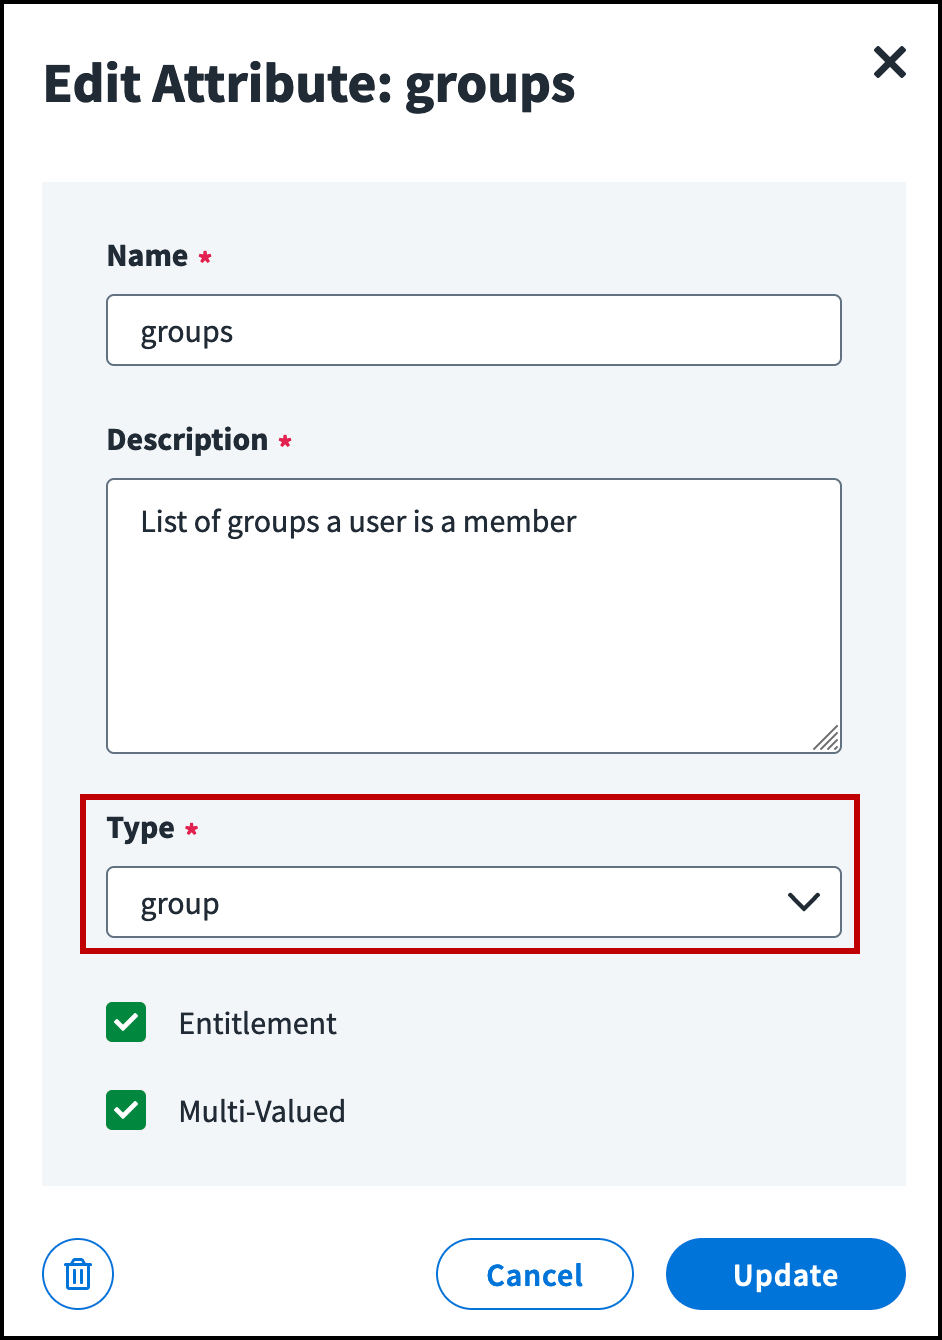 Groups edit attribute window with the group type dropdown list emphasized and the entitlement and multi-valued checkboxes selected.